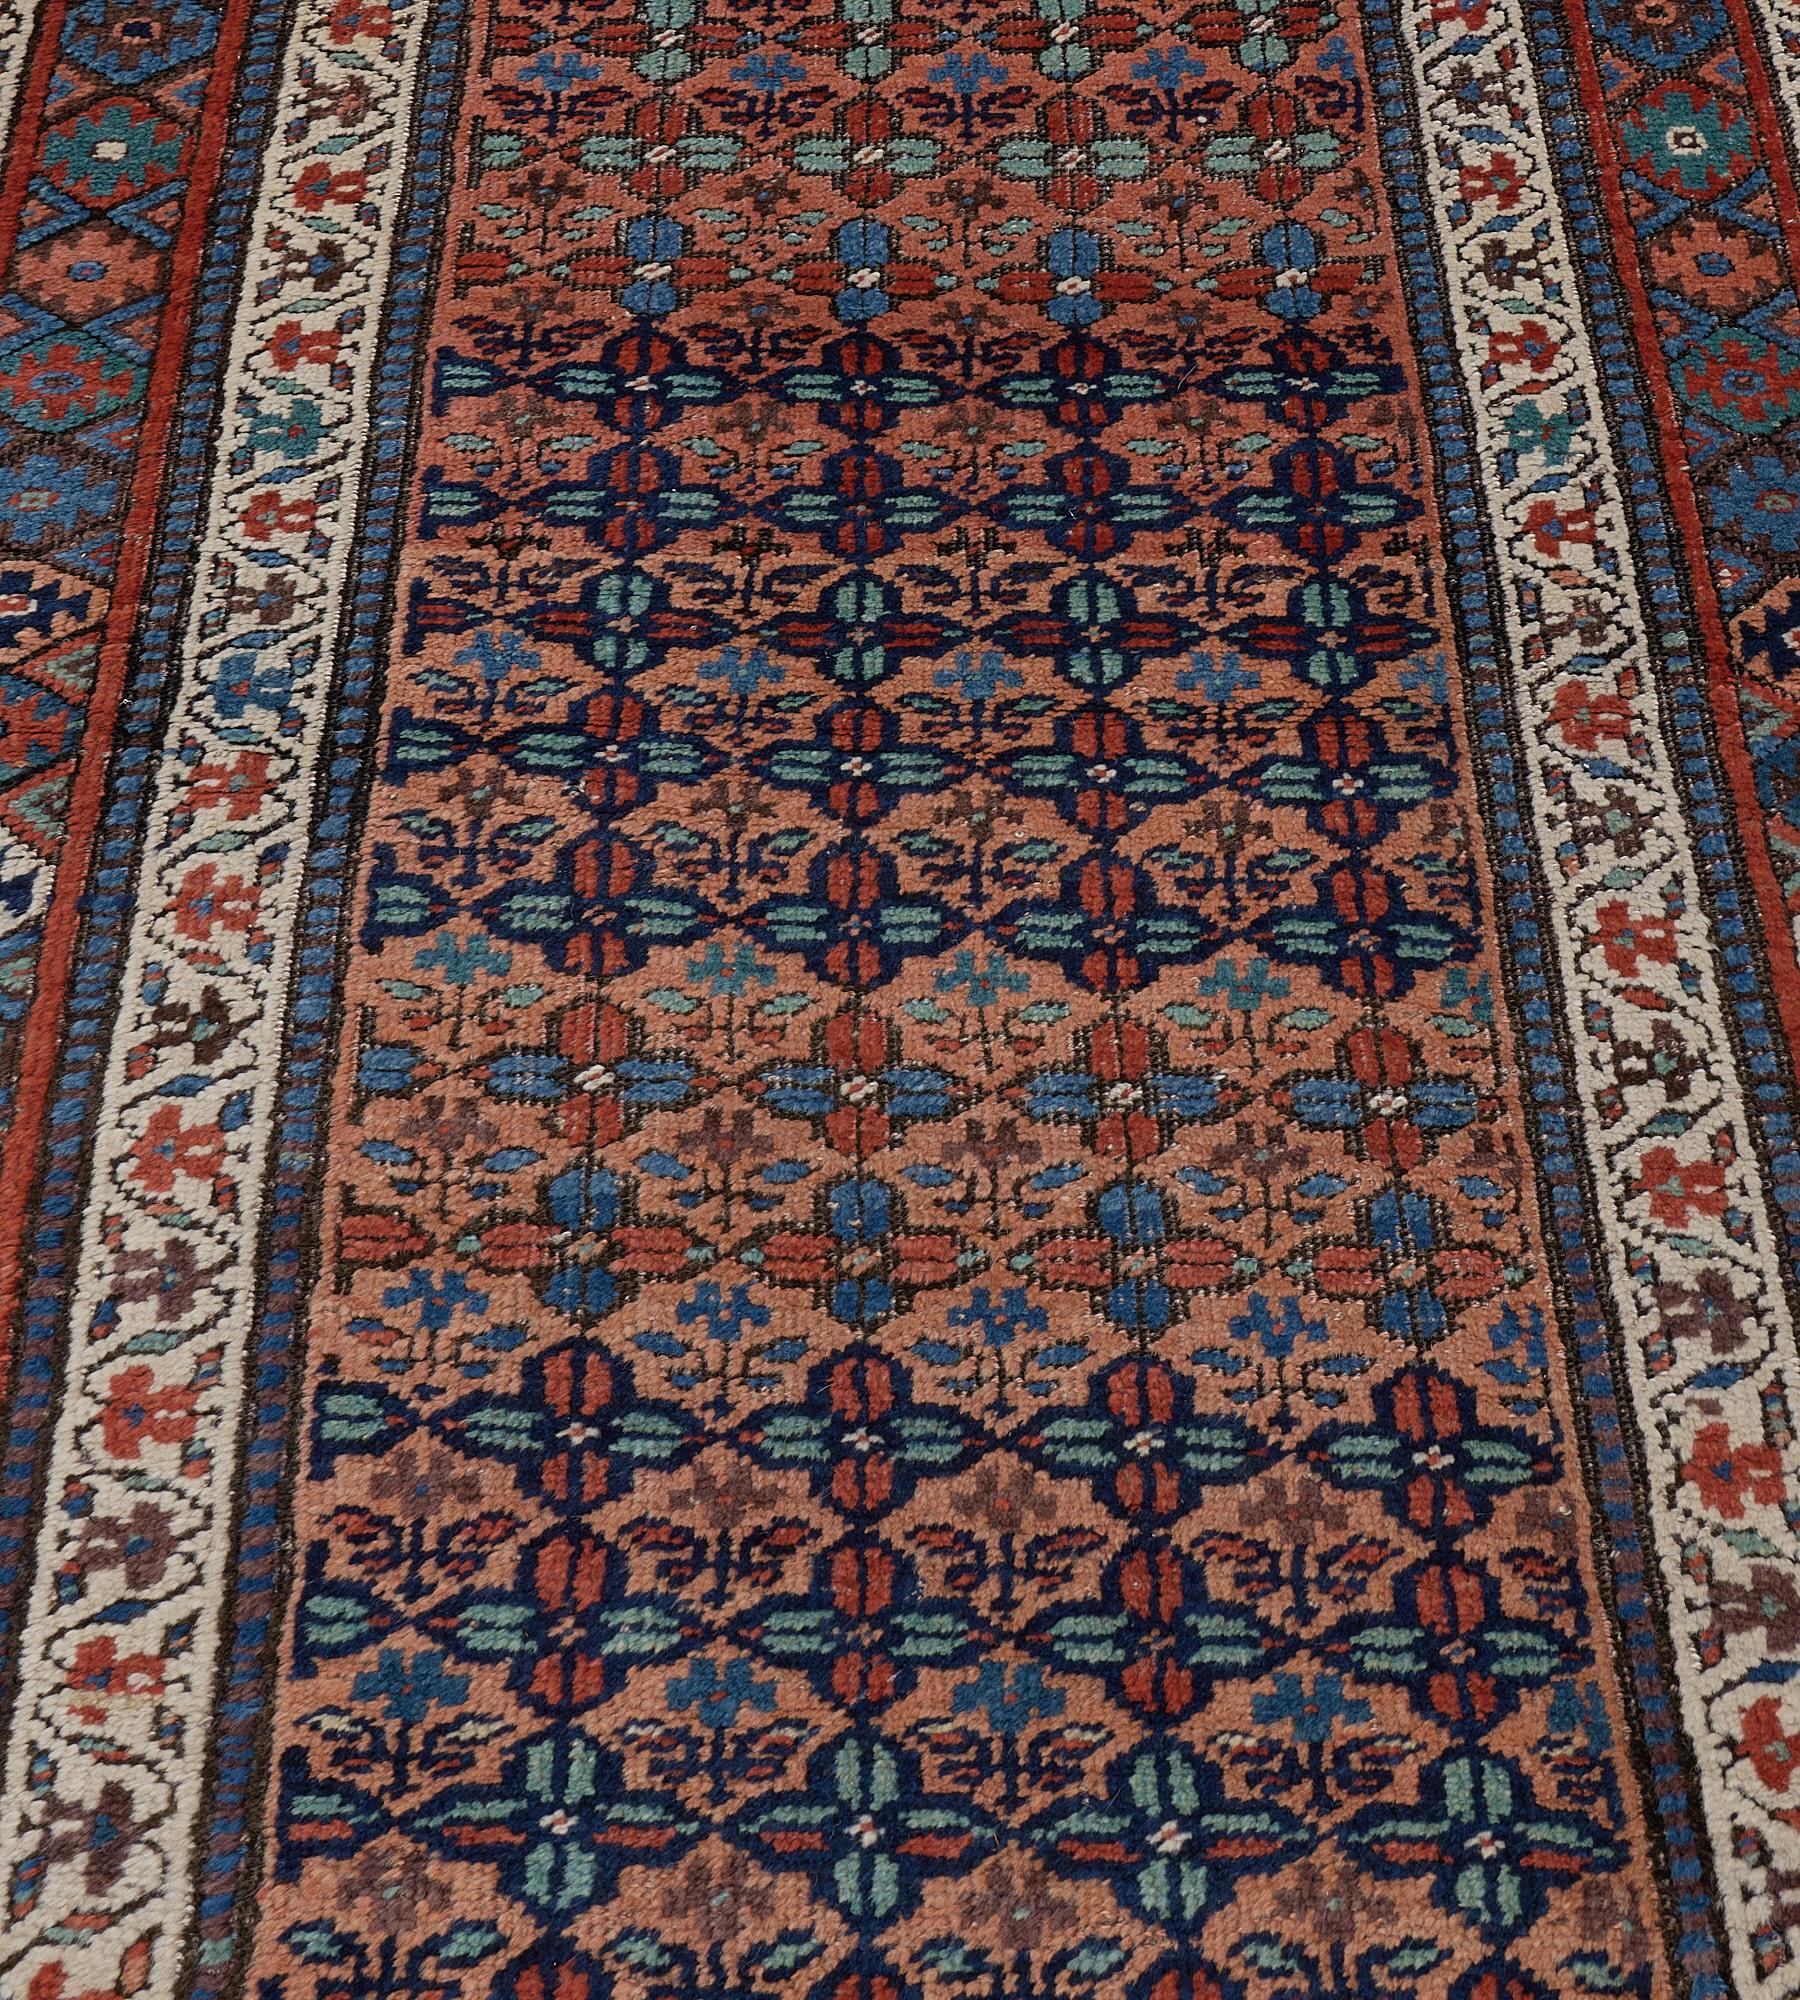 This antique Kurdish rug has a pale terracotta field with diagonal rows of light blue and fox-brown flowerheads forming a lattice enclosing a delicate flowering stem, in a border of polychrome linked lozenge between broad ivory meandering floral